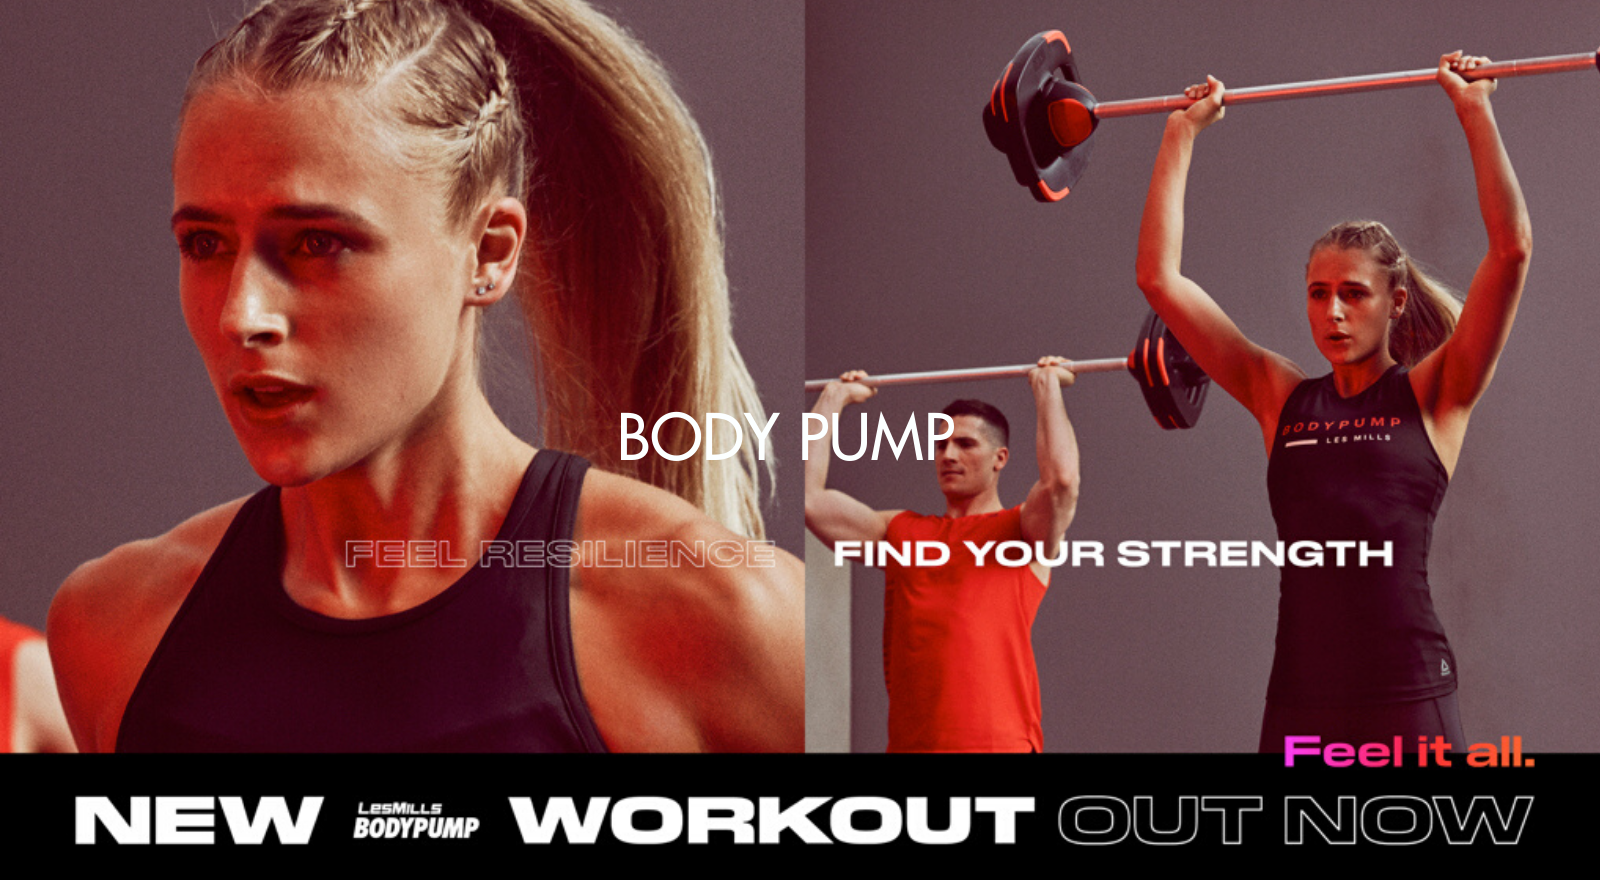 body pump, body pump exeter, exeter golf and country club, body pump class exeter, les mills body pump